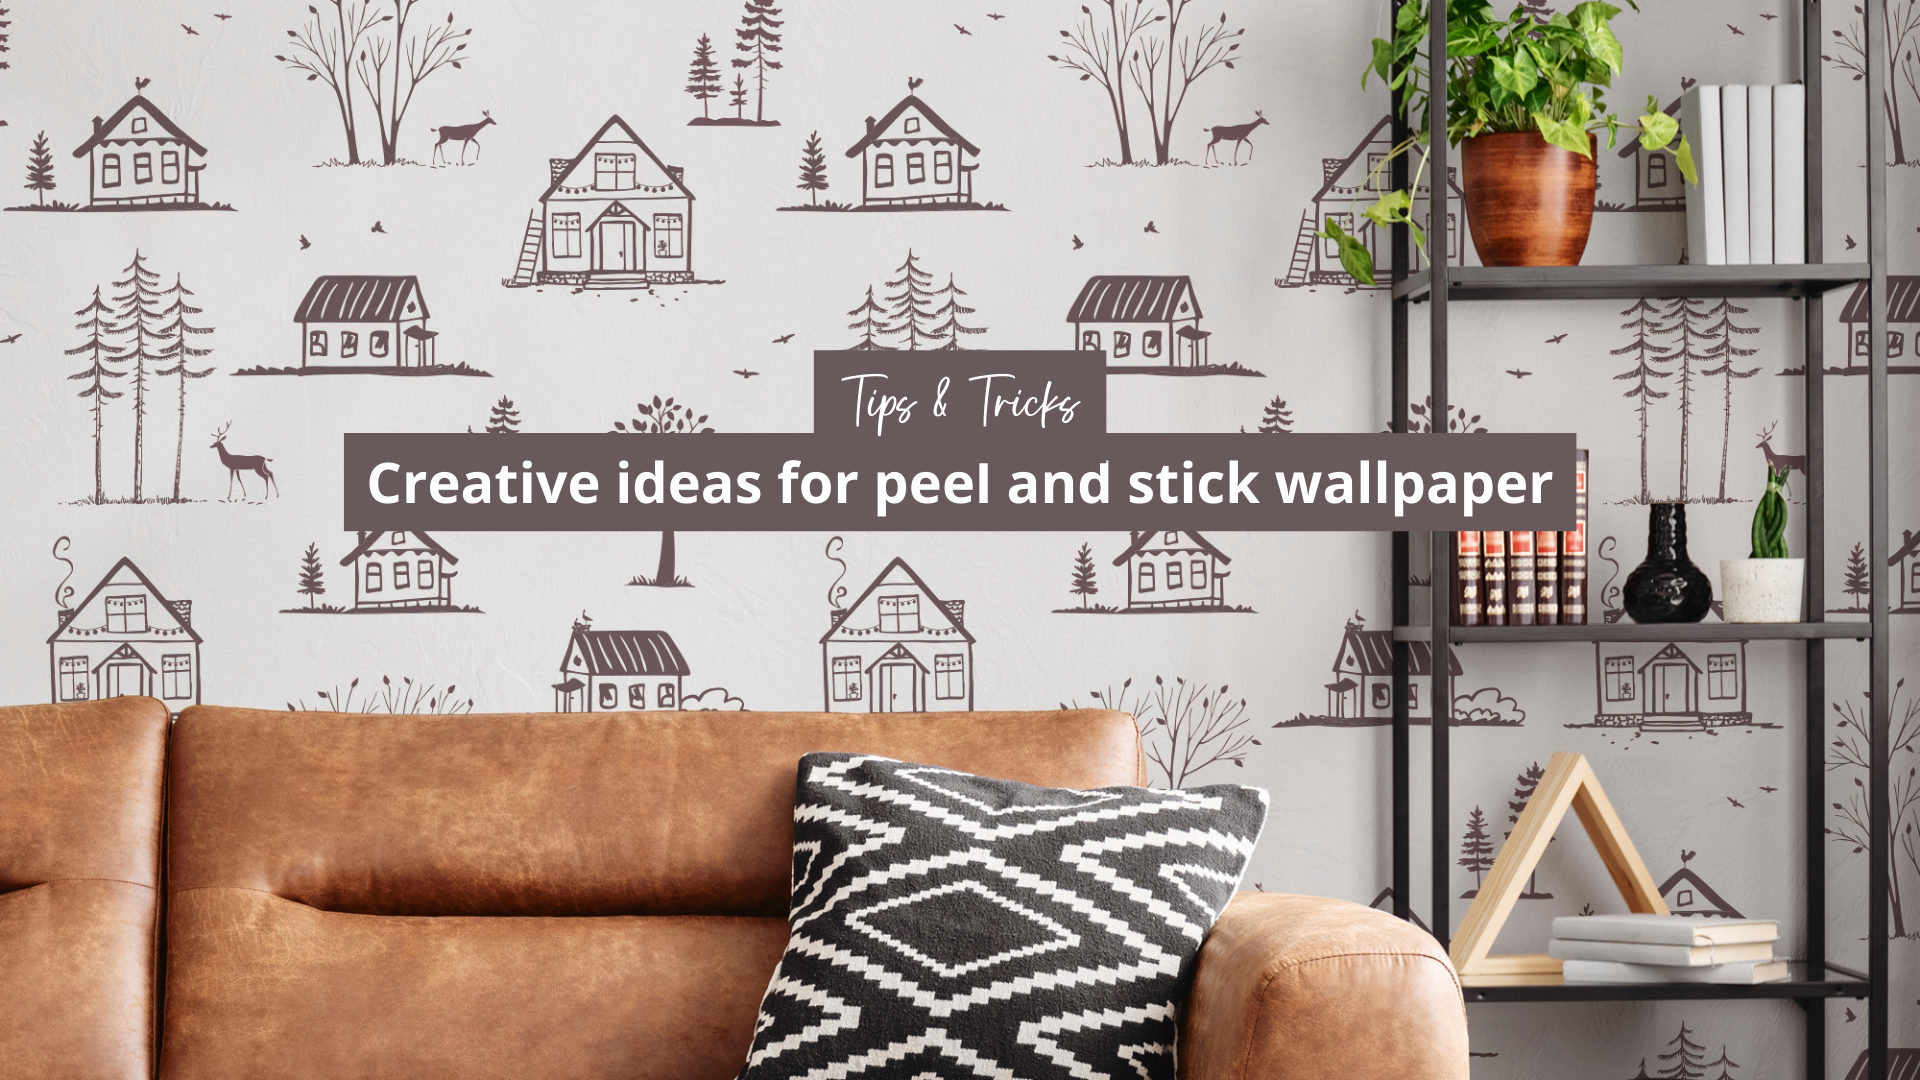 Upgrade Your Space with These Jaw-Dropping Peel and Stick Wallpaper Ideas